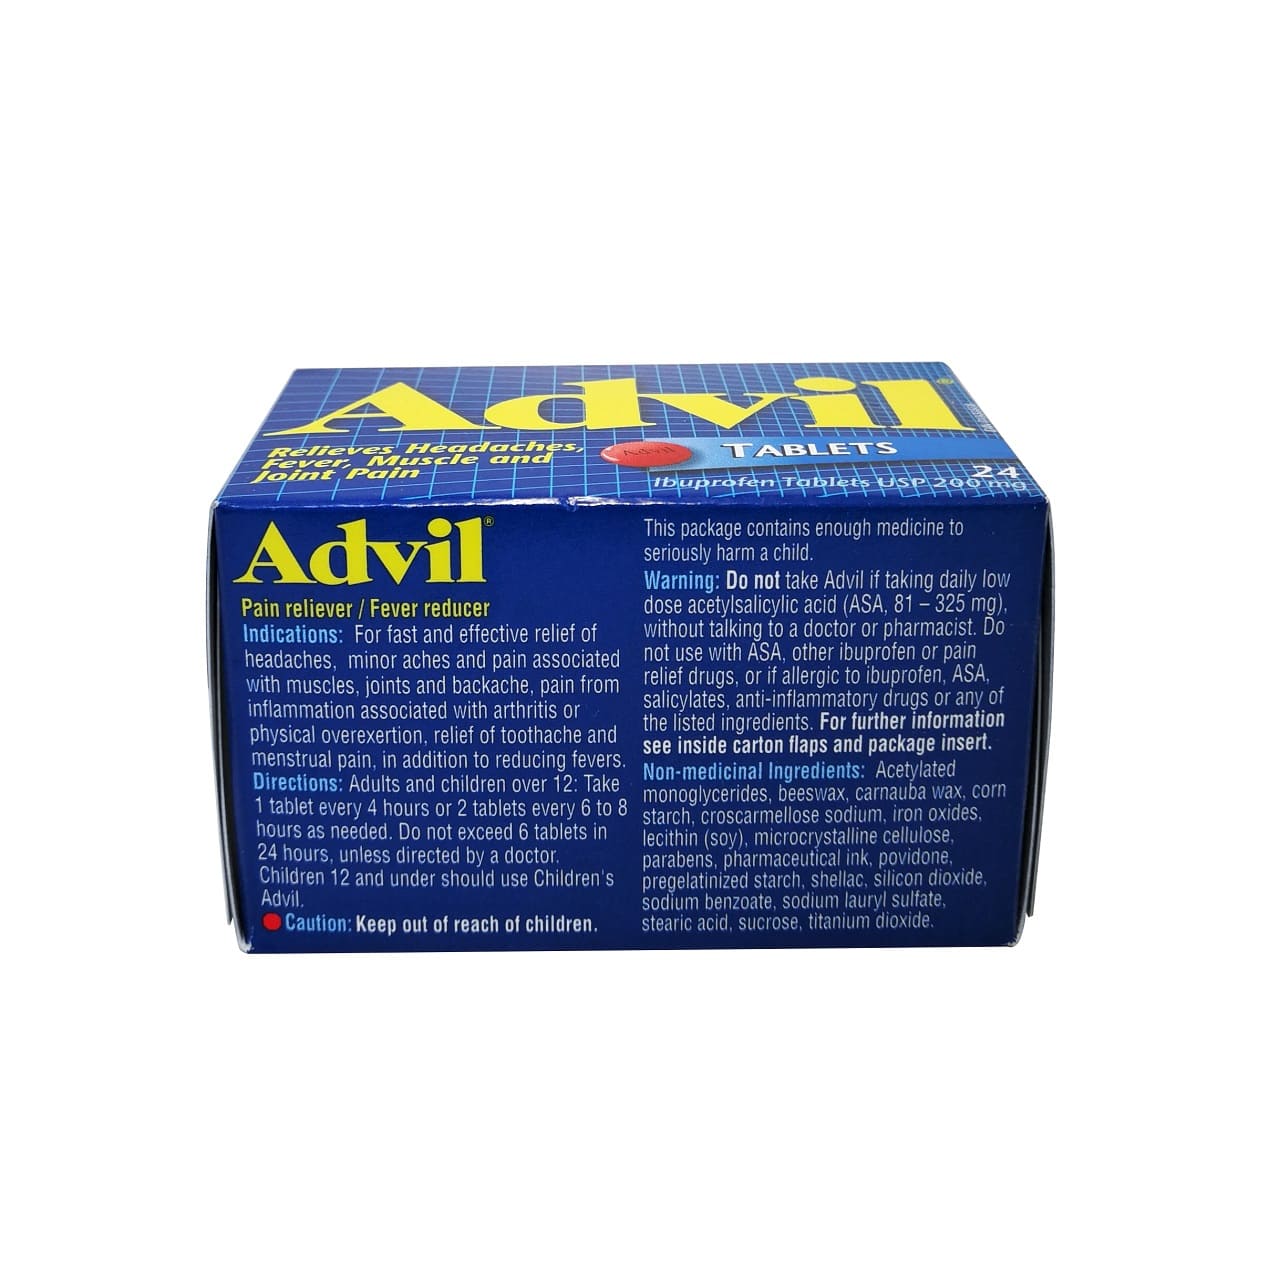 Indications, directions, warnings, and ingredients for Advil Ibuprofen 200 mg (24 Tablets) in English